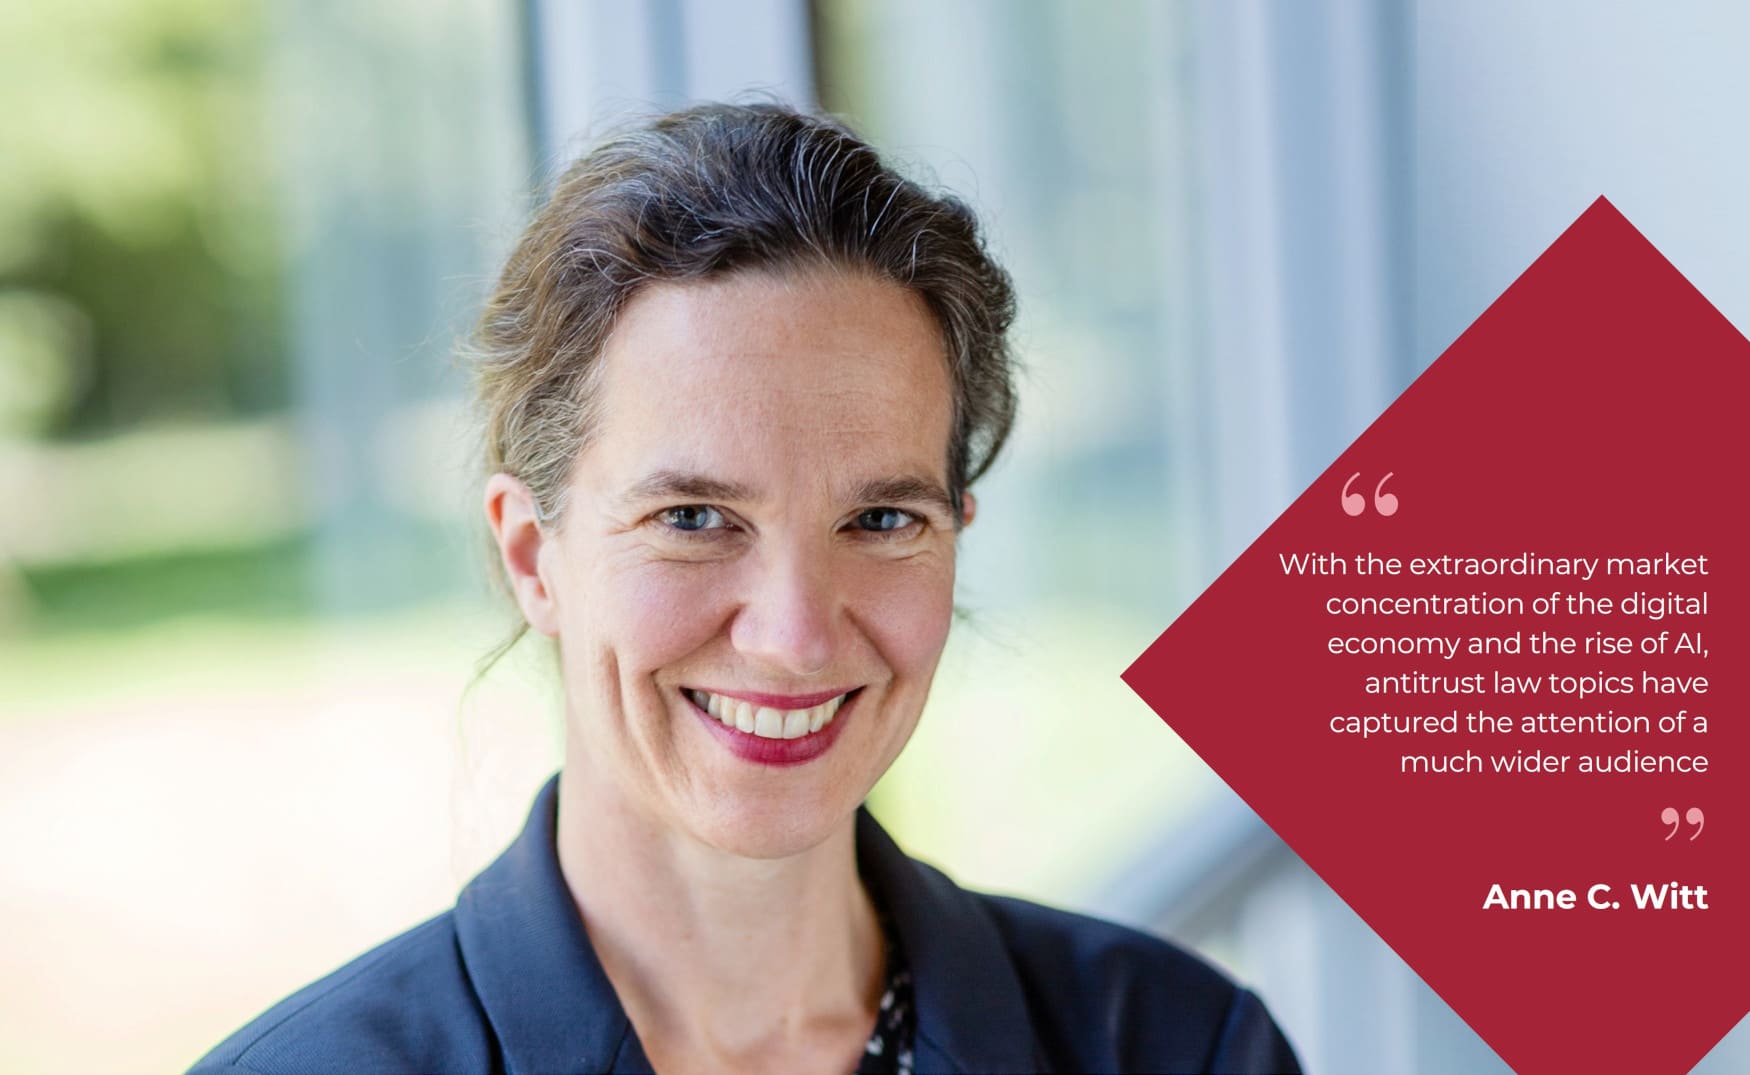 Anne C. Witt -With the extraordinary market concentration of the digital economy and the rise of AI, antitrust law topics have captured the attention of a much wider audience"